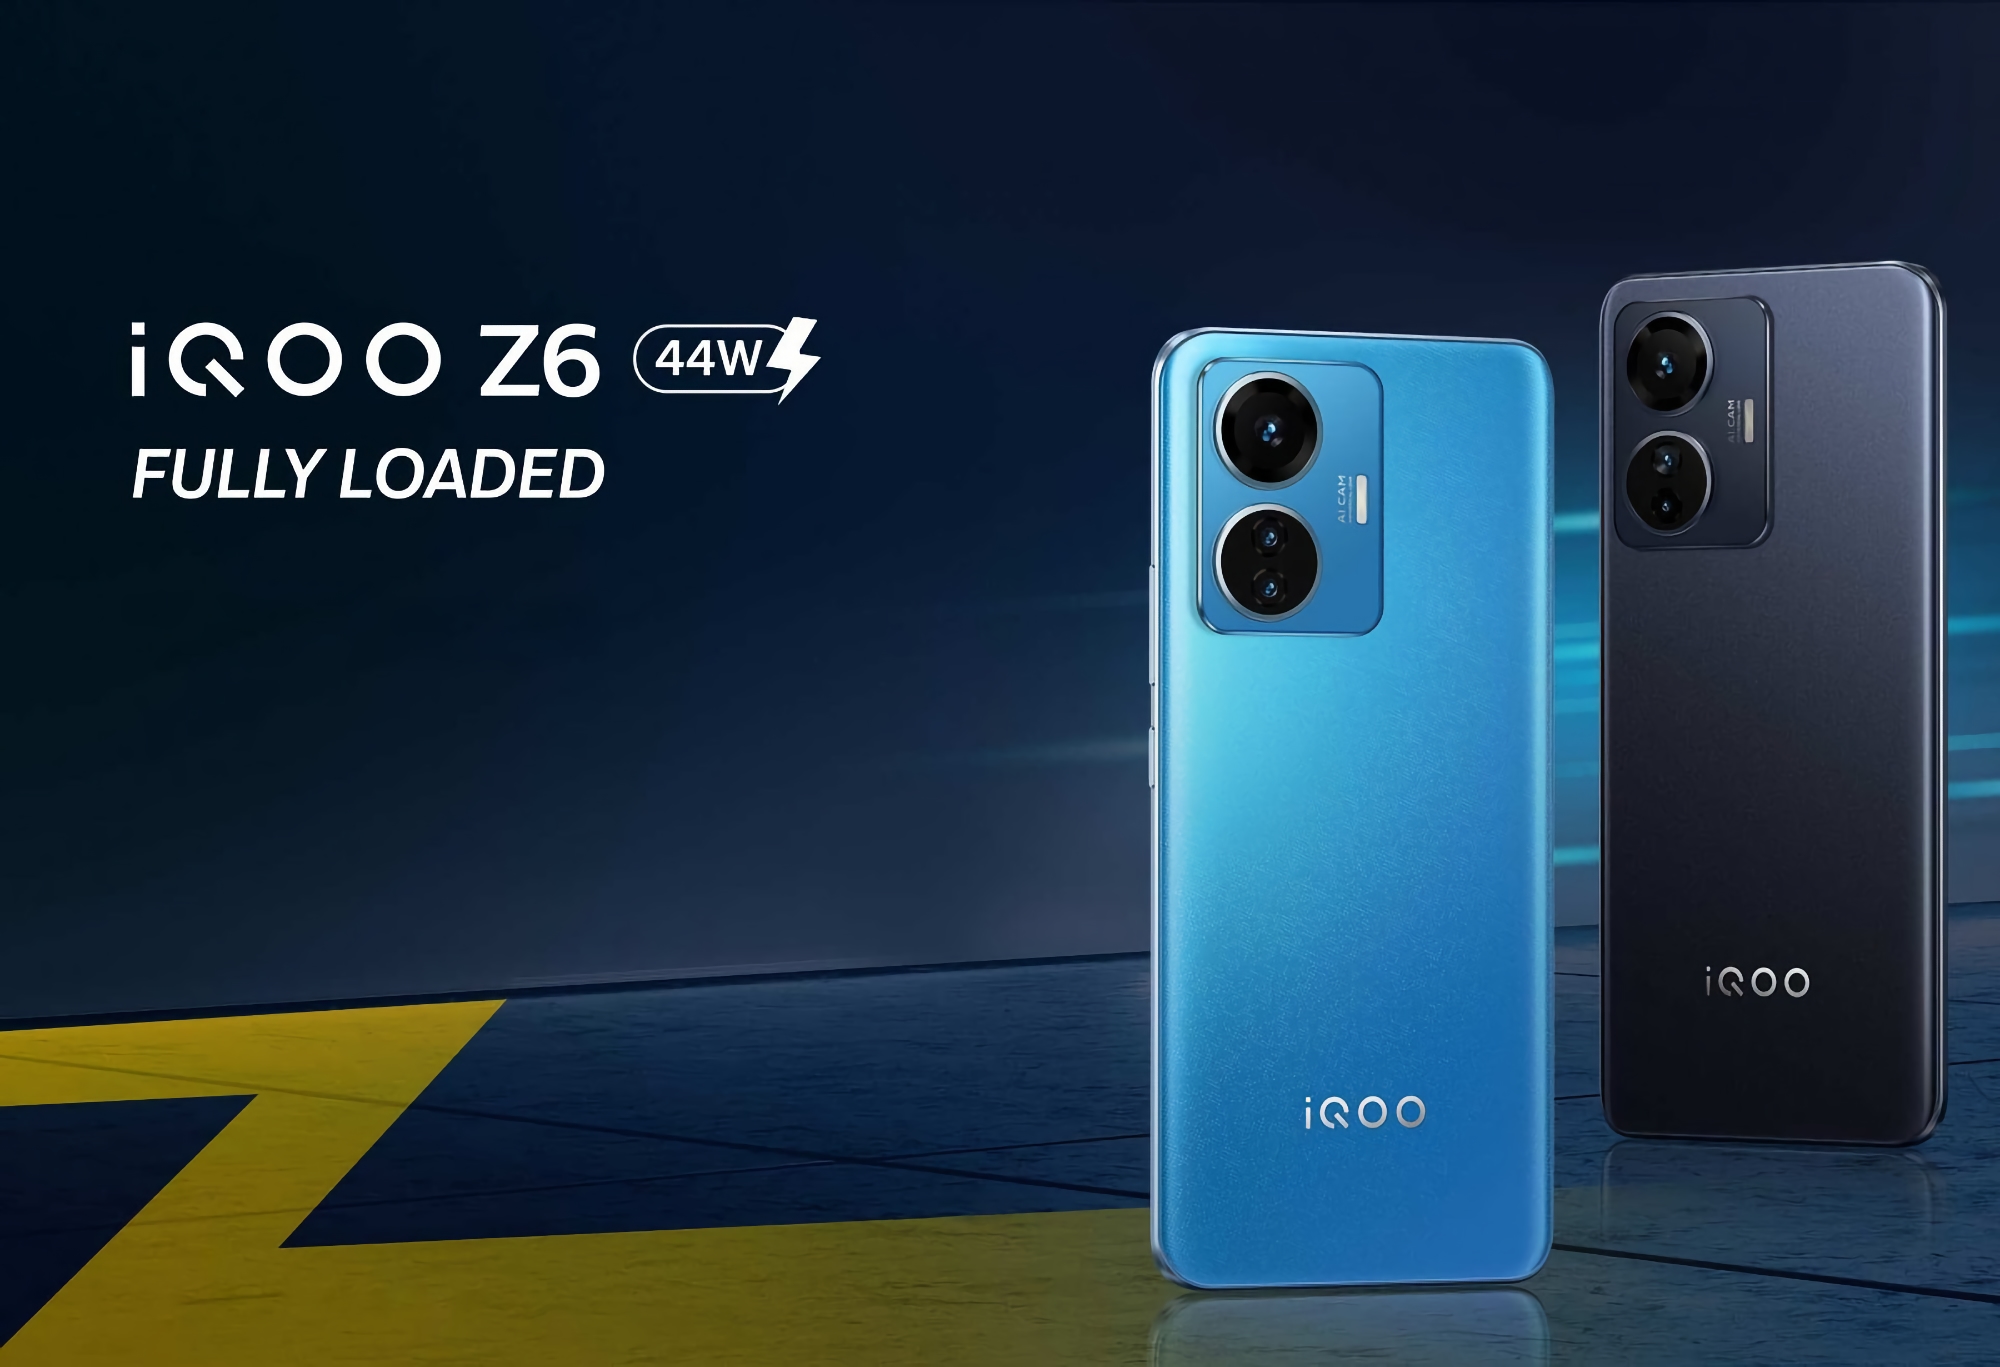 iQOO Z6: Snapdragon 680 chip, up to 8GB RAM, 5000mAh battery with 44W charging for $189